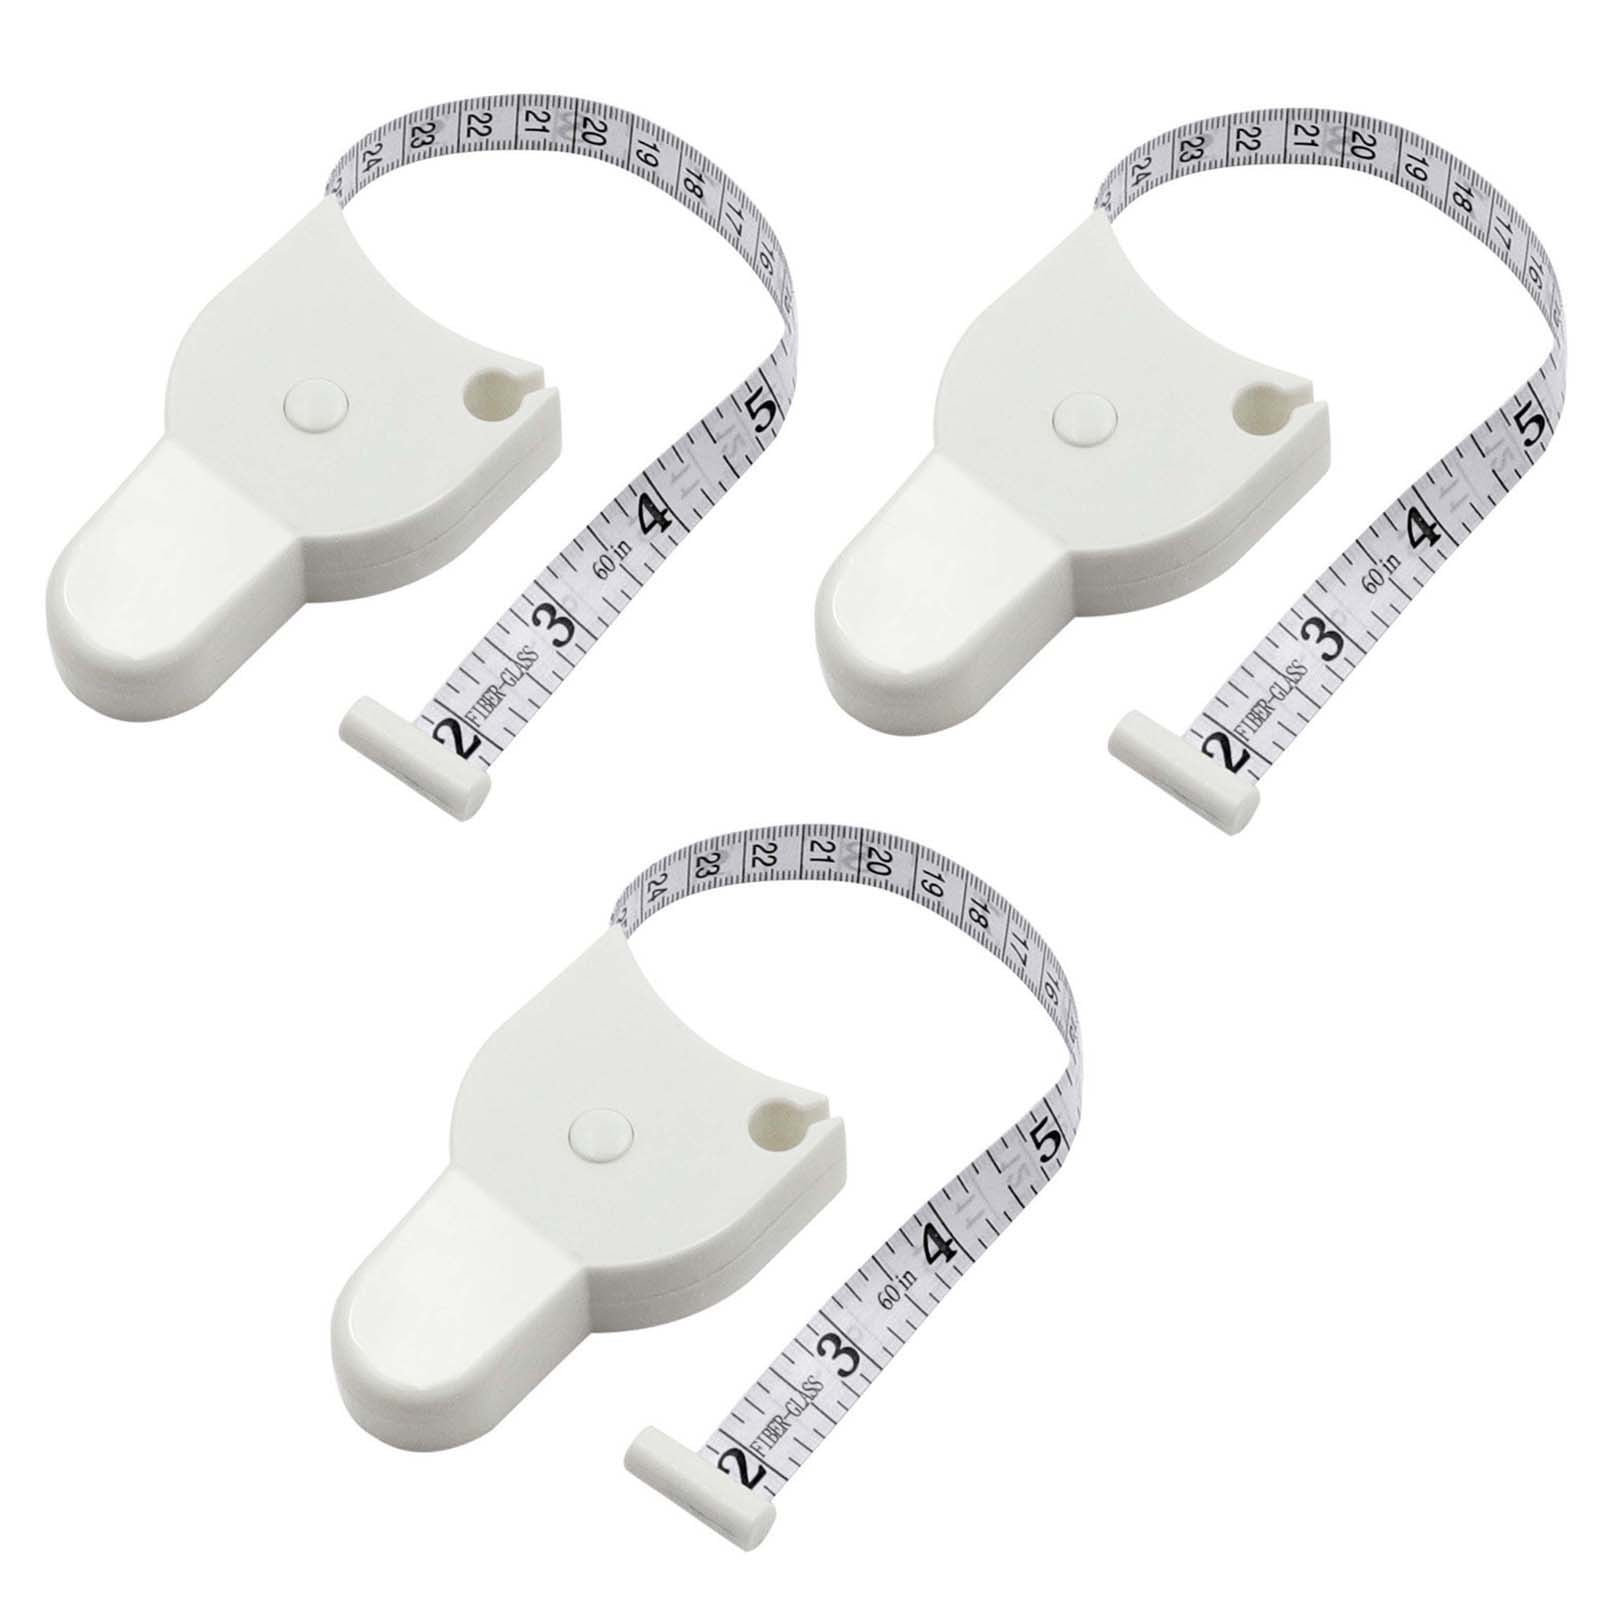 Vamor Body Measuring Tape 60 Inch Weight Loss Retractable Measure Tape with  Lock Pin and Push Button for Fitness, Tailor, Sewing (Black/White)